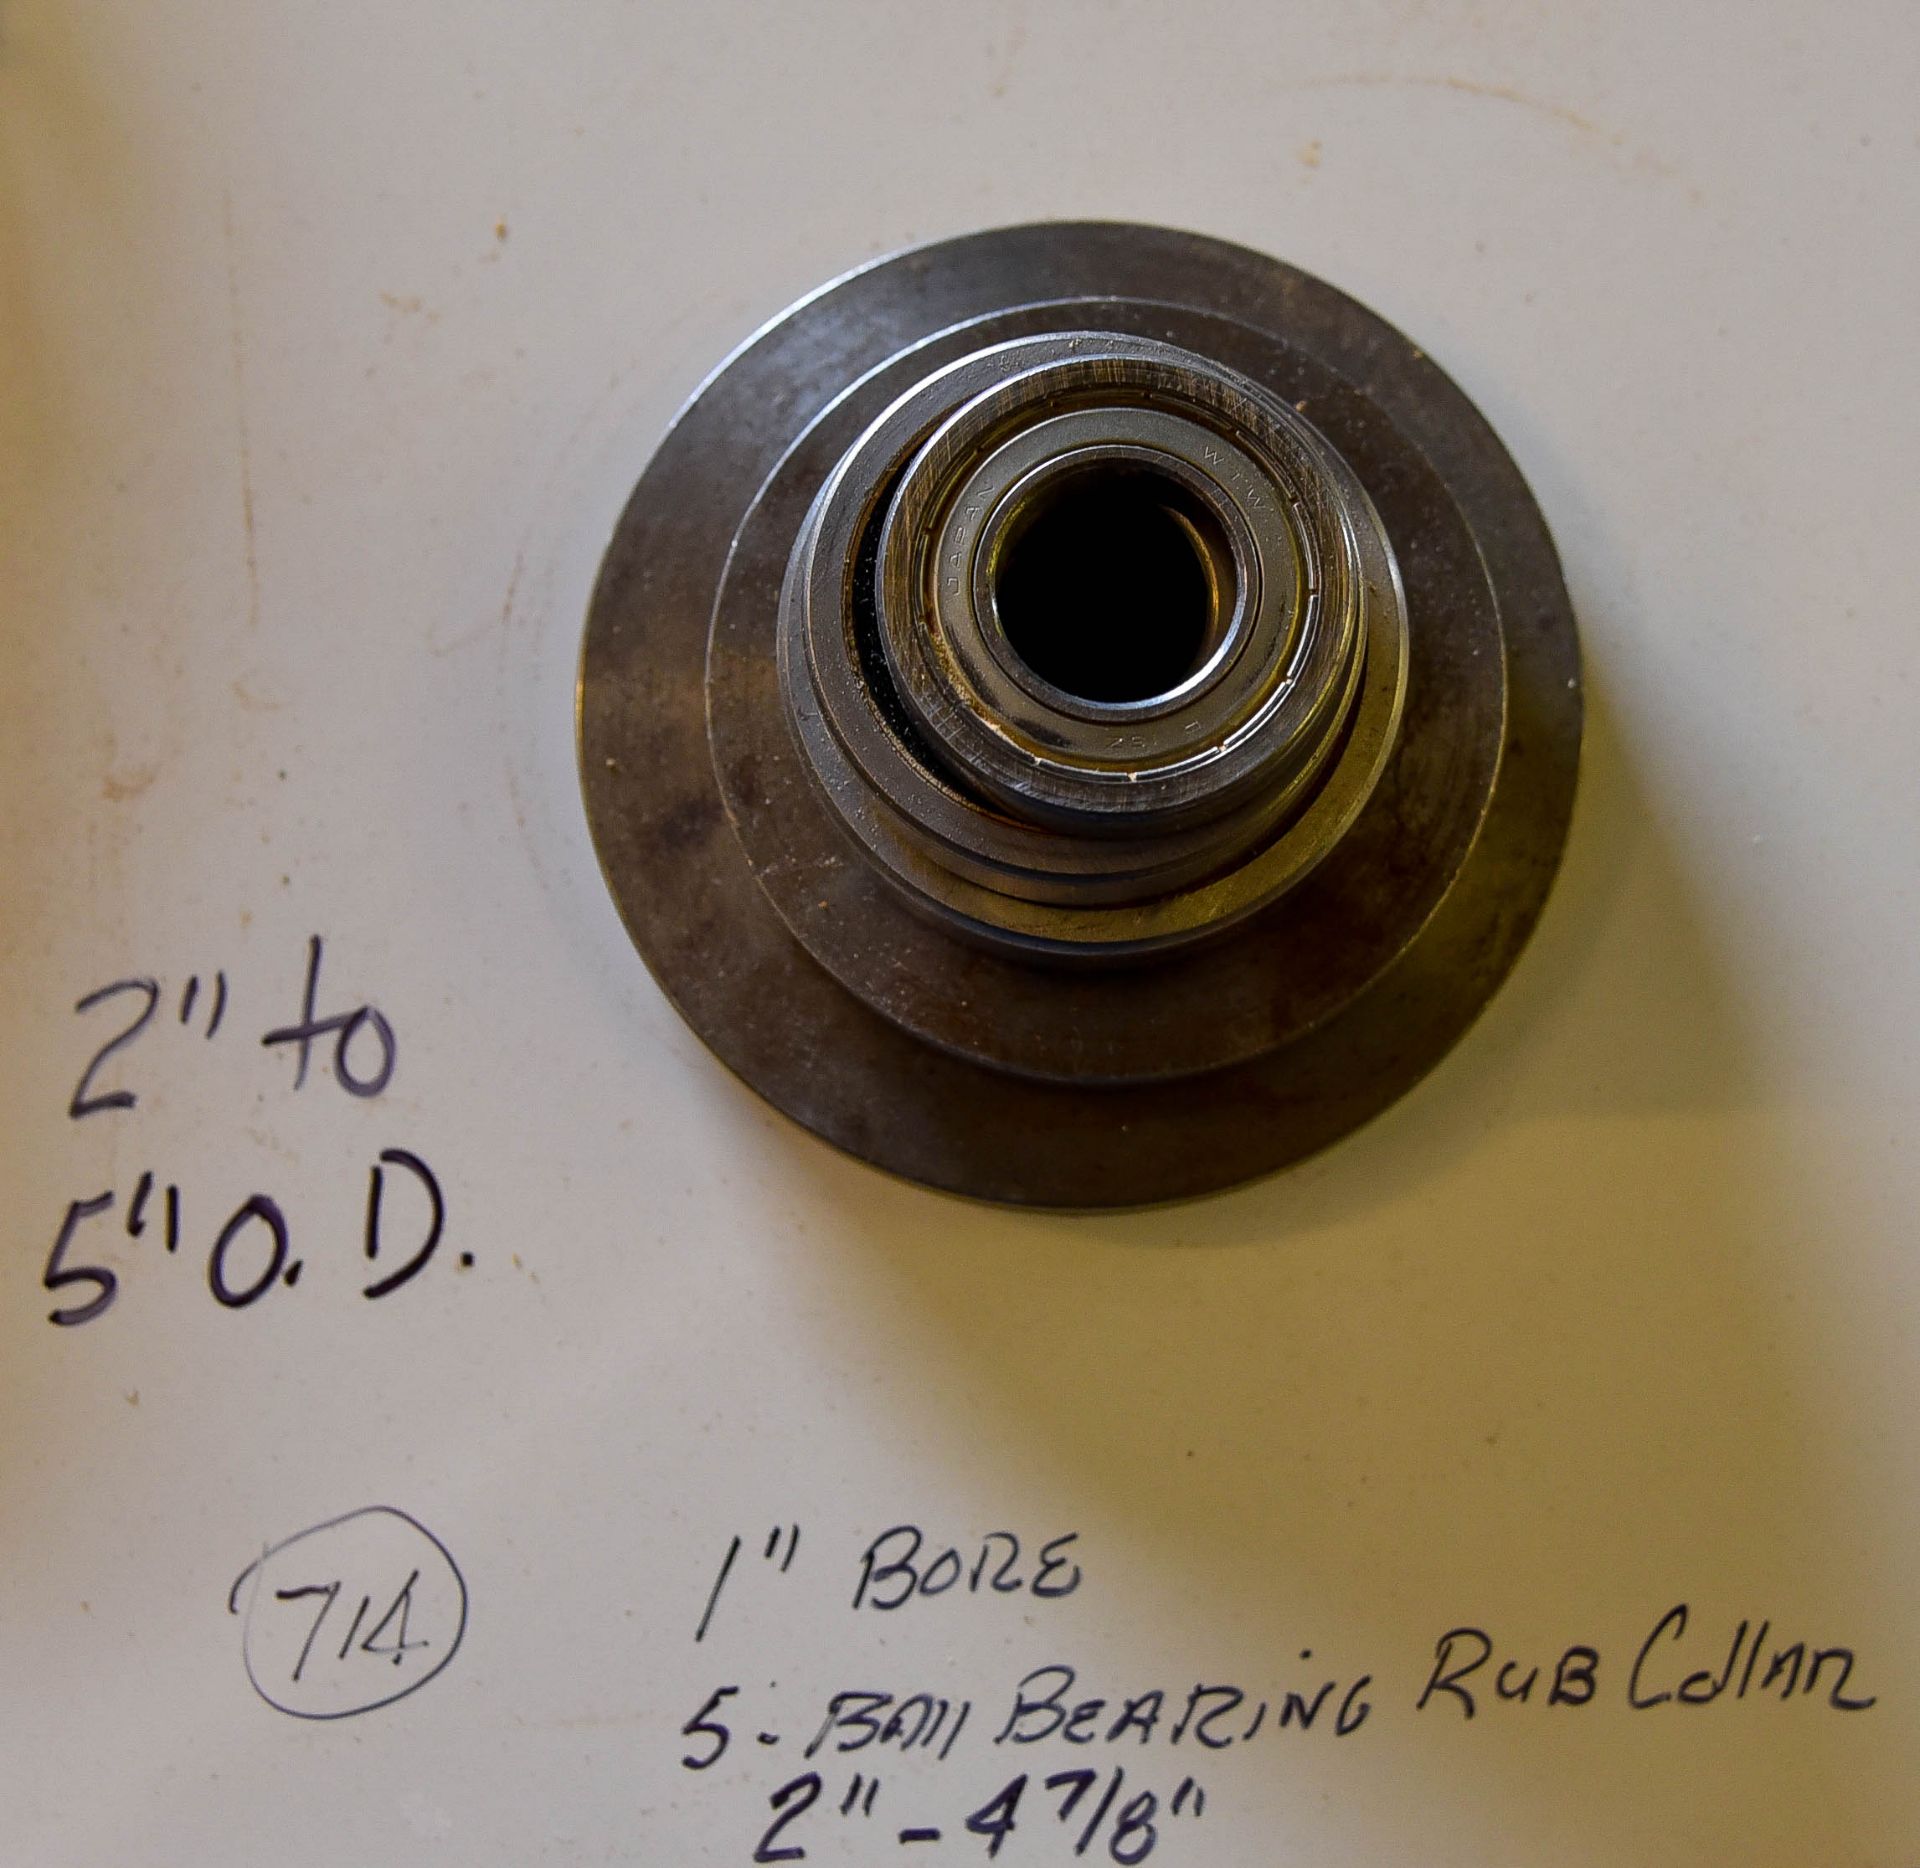 5 Ball Bearing Rub Collars, 2" - 4-7/8", 1" Bore, 2" to 5" Outside Diameter, Good Condition and